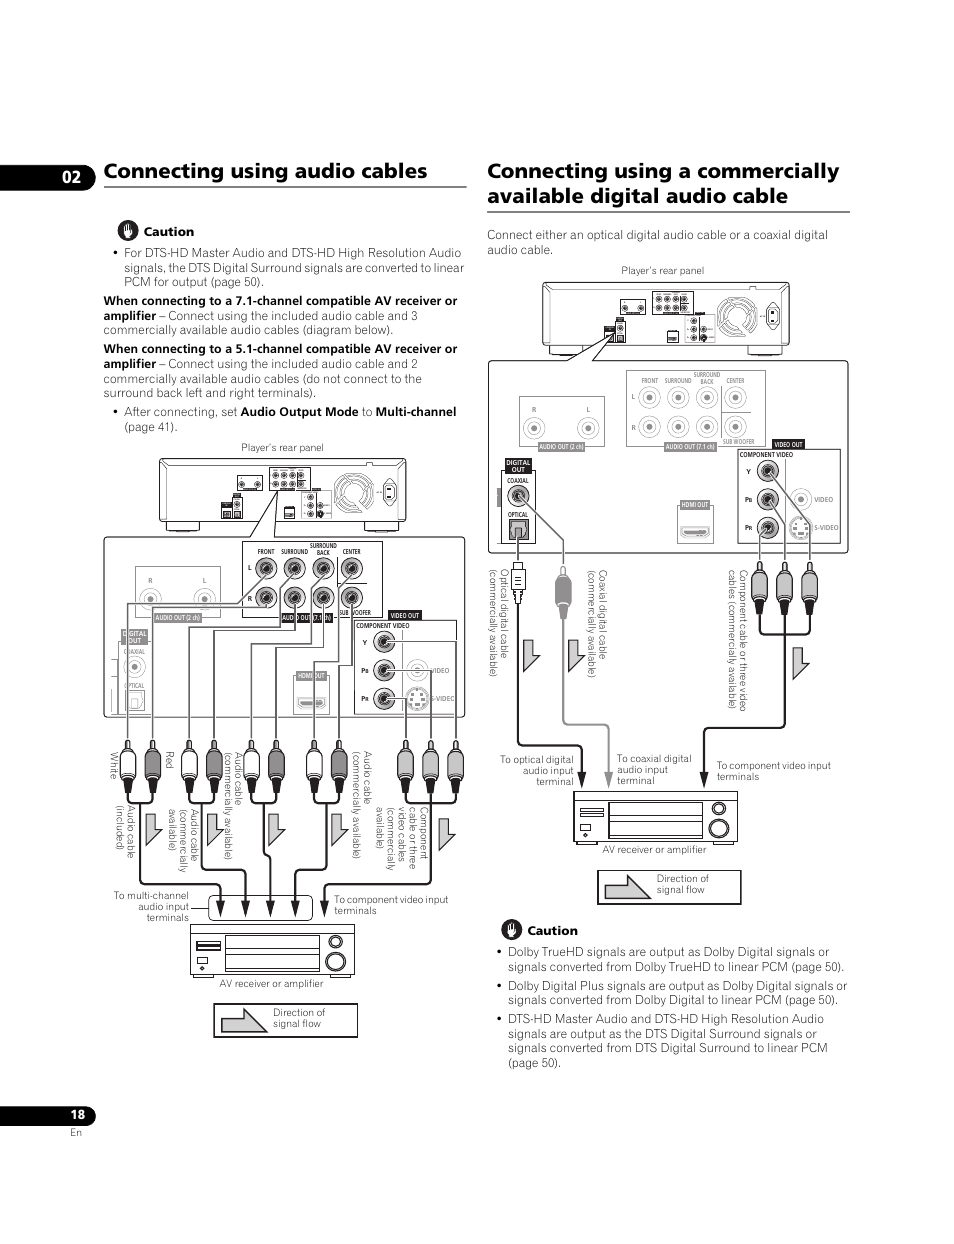 Connecting using audio cables | Pioneer BDP-LX71 User Manual | Page 18 / 72  | Original mode